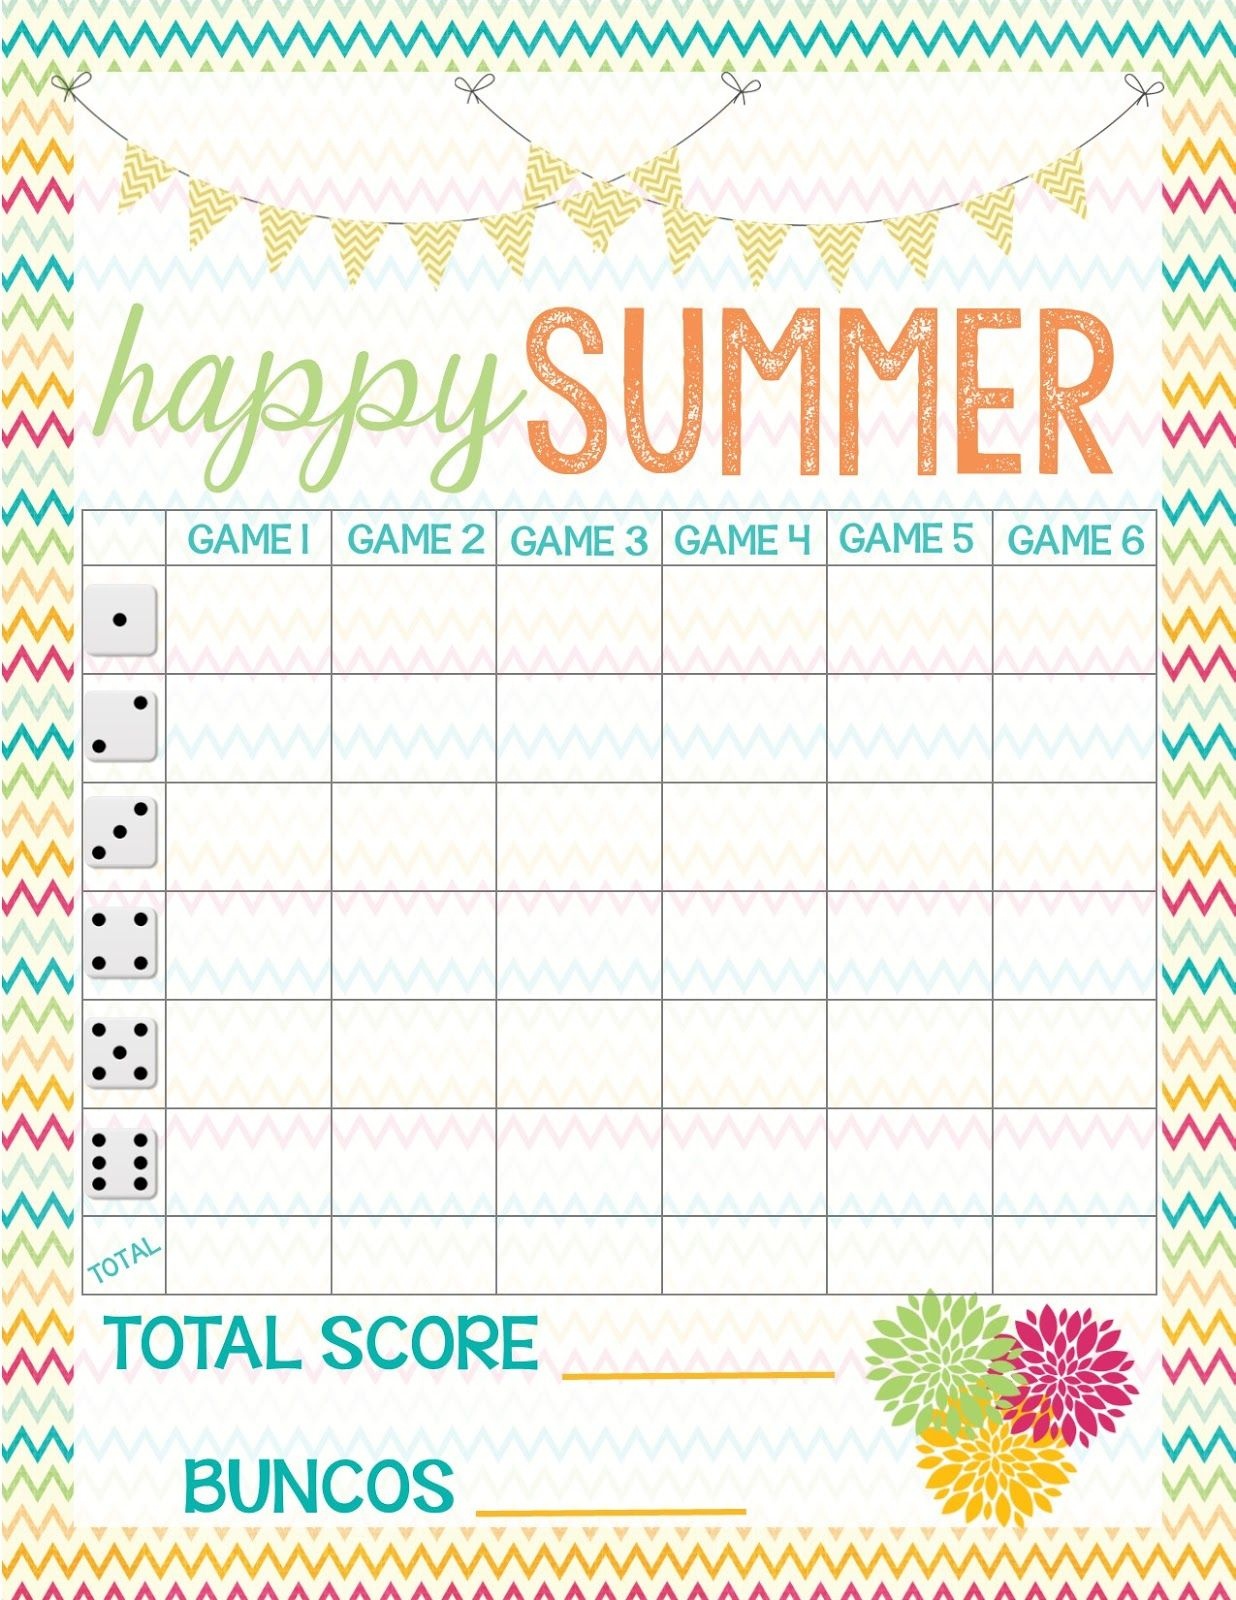 Recipes From Stephanie: Free Bunco Score Sheet | Bunco In 2019 - Free Printable Bunco Game Sheets